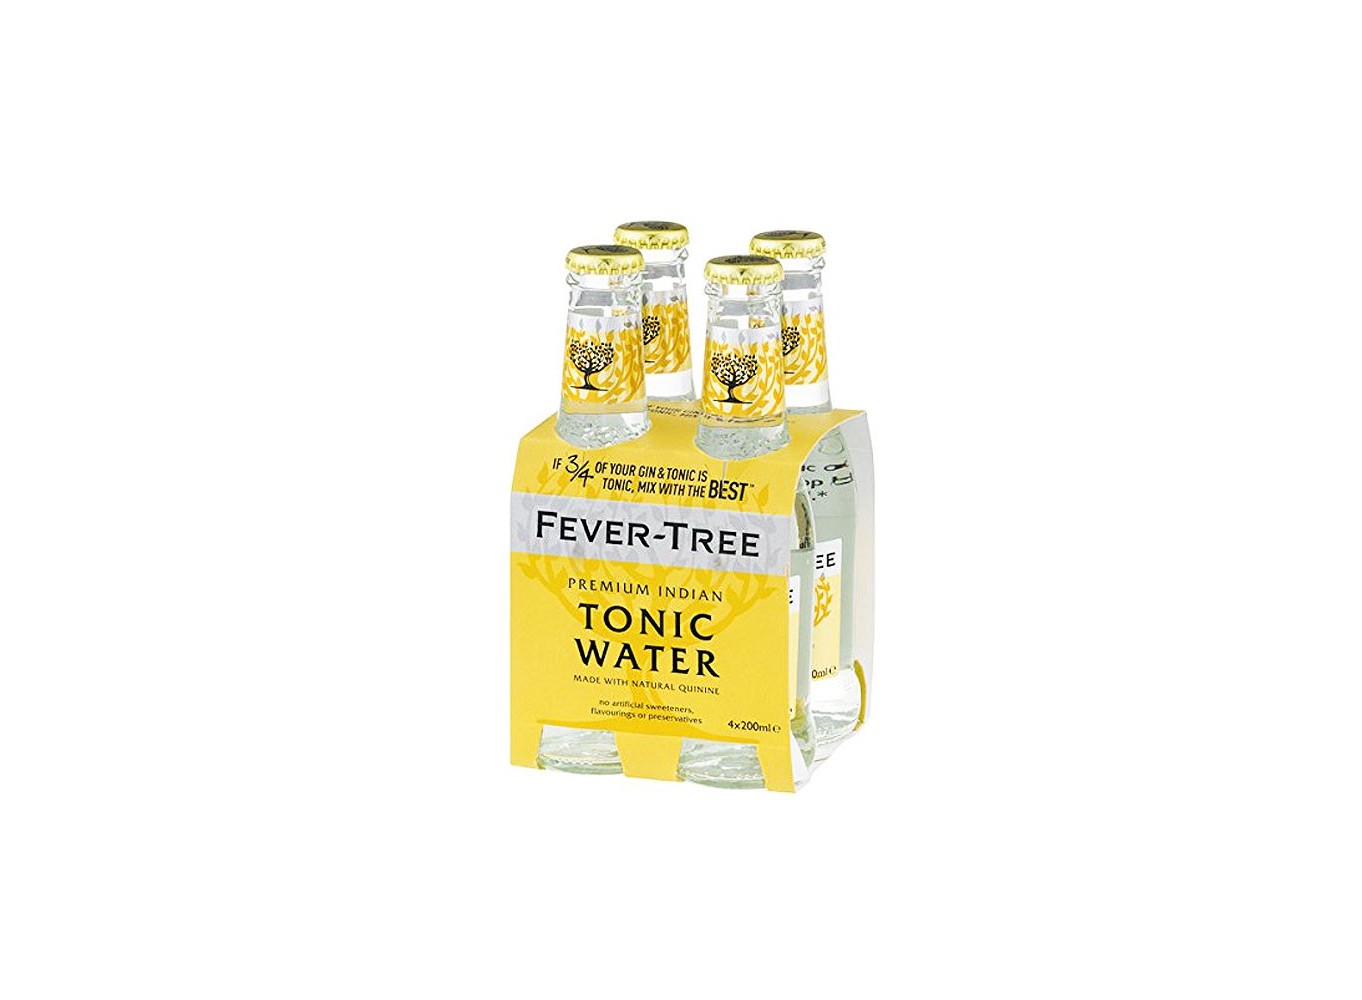  Tonica Water Fever-Tree Premium Indian Pack 4 ampolles